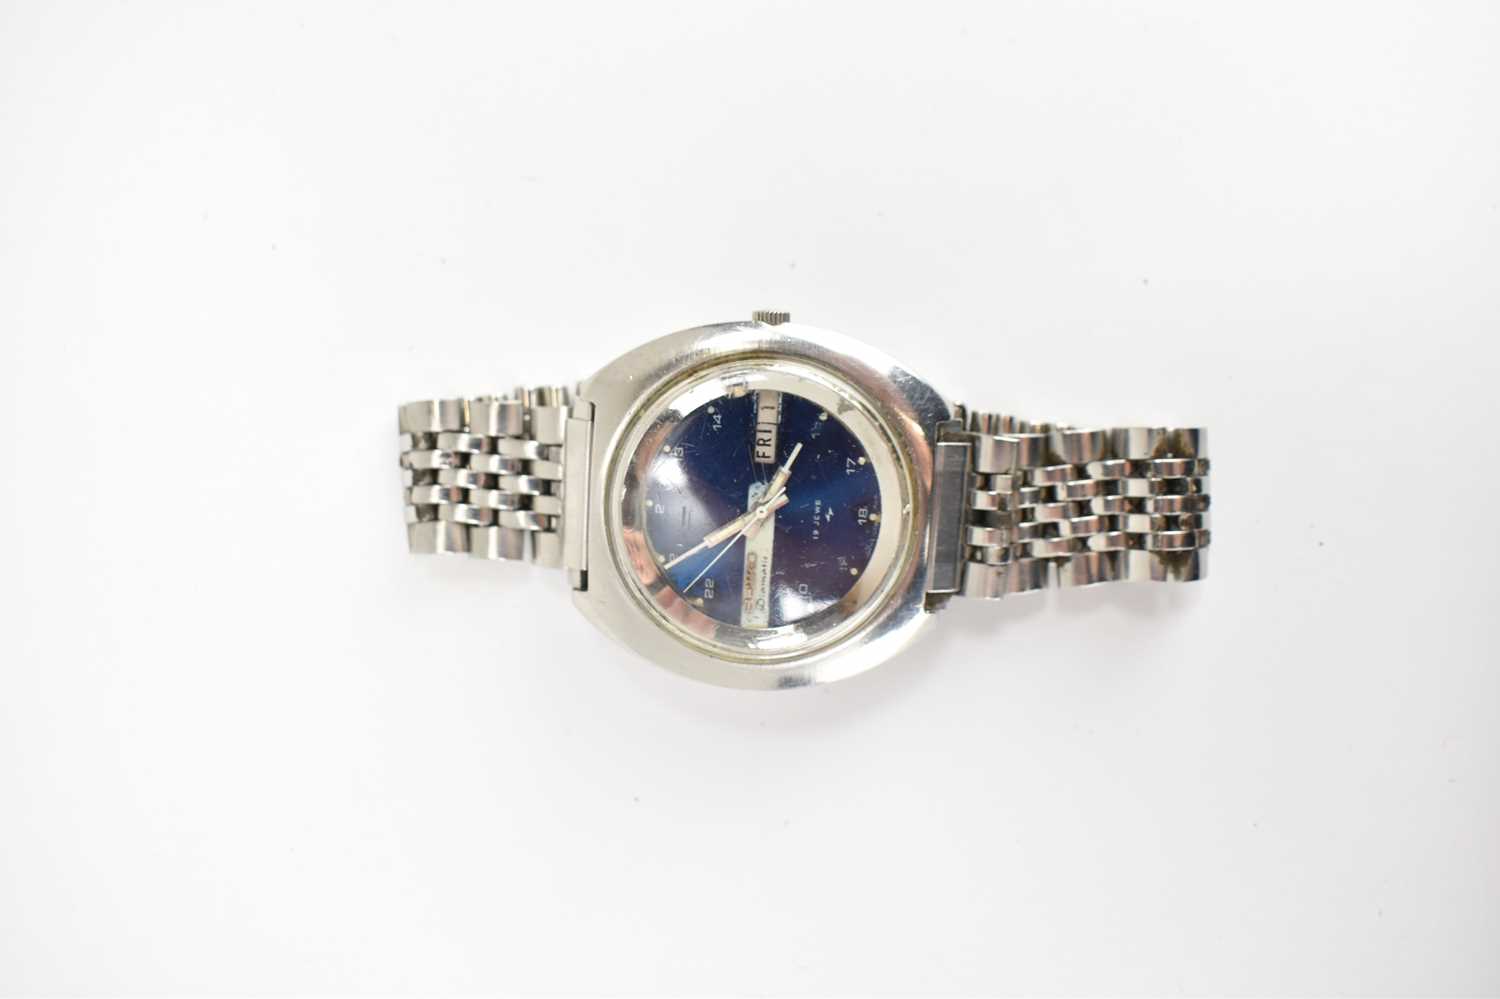 SEIKO; a vintage Diamatic automatic wristwatch, model number 7006-6020, 560127, with blue dial, - Image 2 of 4